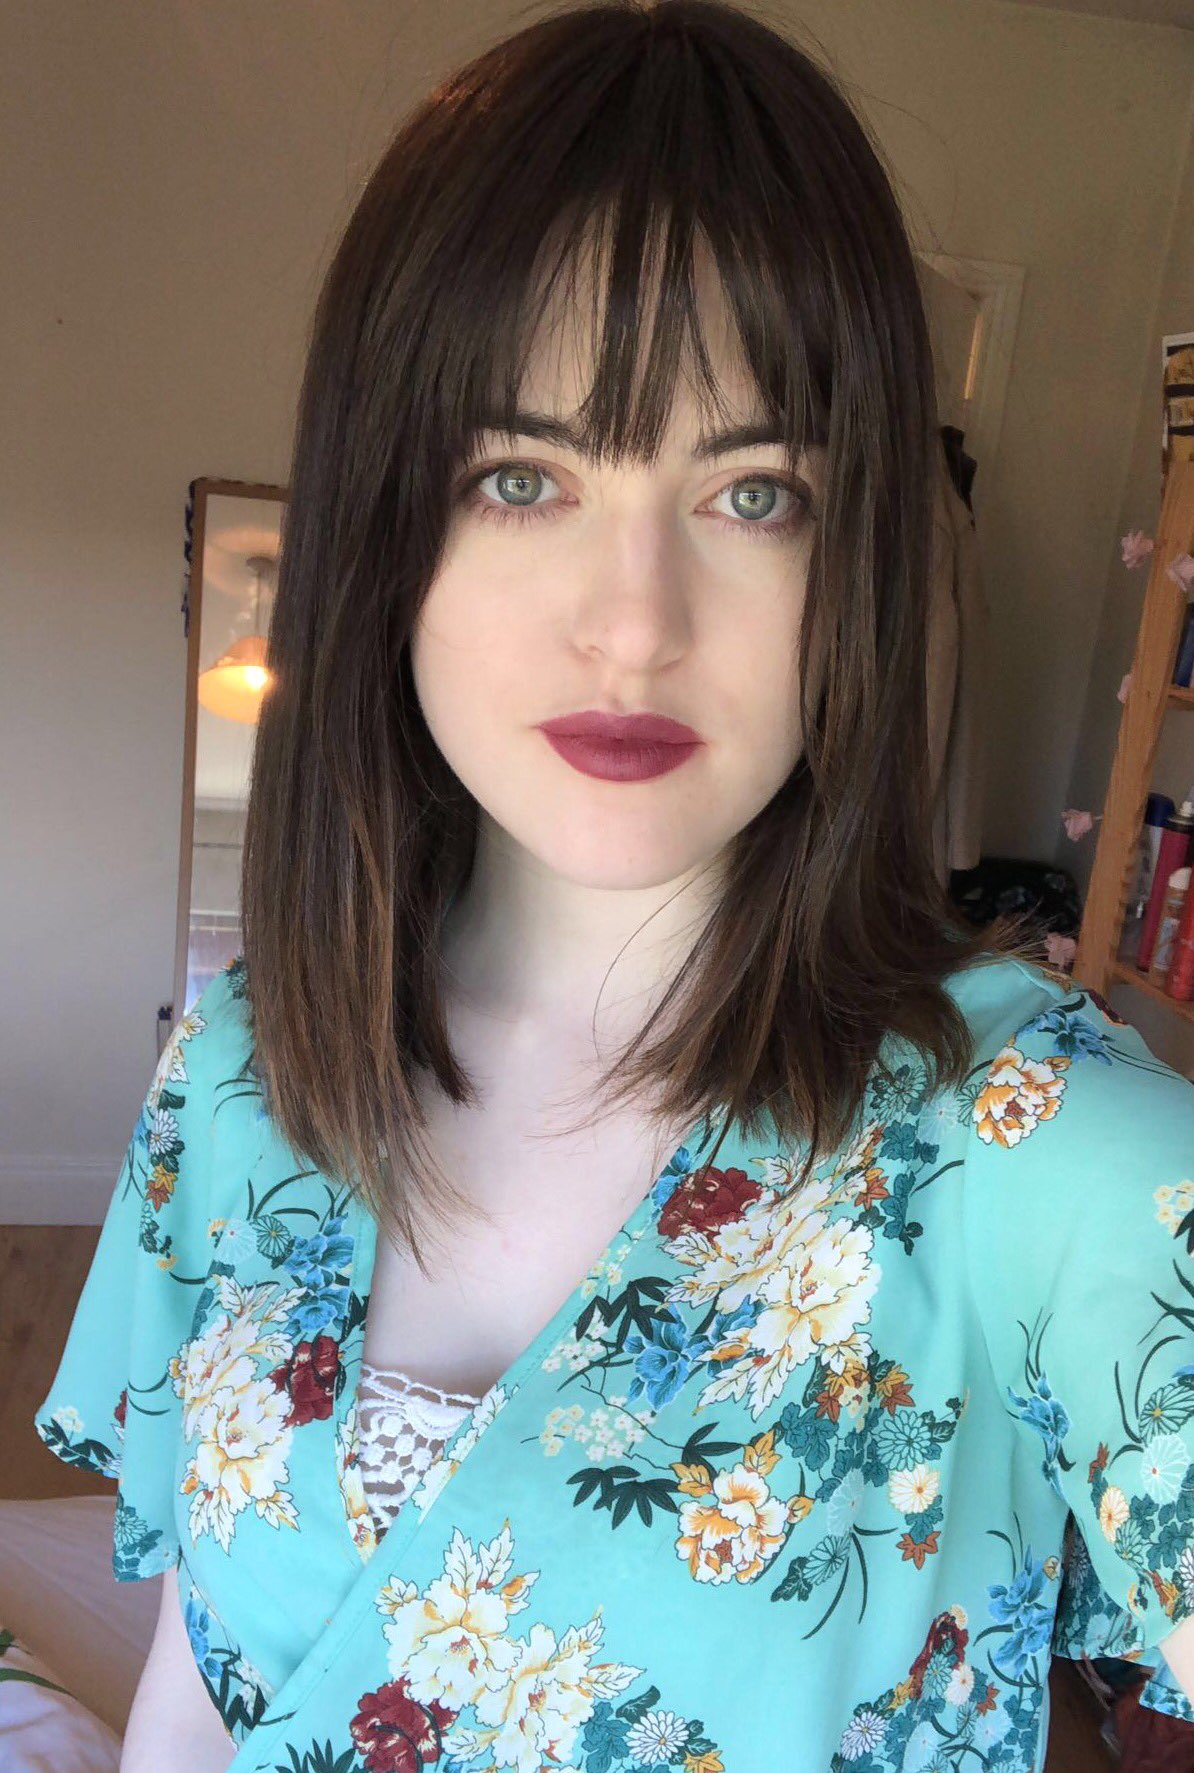 Dakota Johnson Says Bye-Bye To Her Brunette Locks & Sports An Edgy Blonde  Hairstyle For Her Upcoming Film Daddio, Looking Sassy & Making Us Wonder  How Many 'Shades' Does This Woman Have!